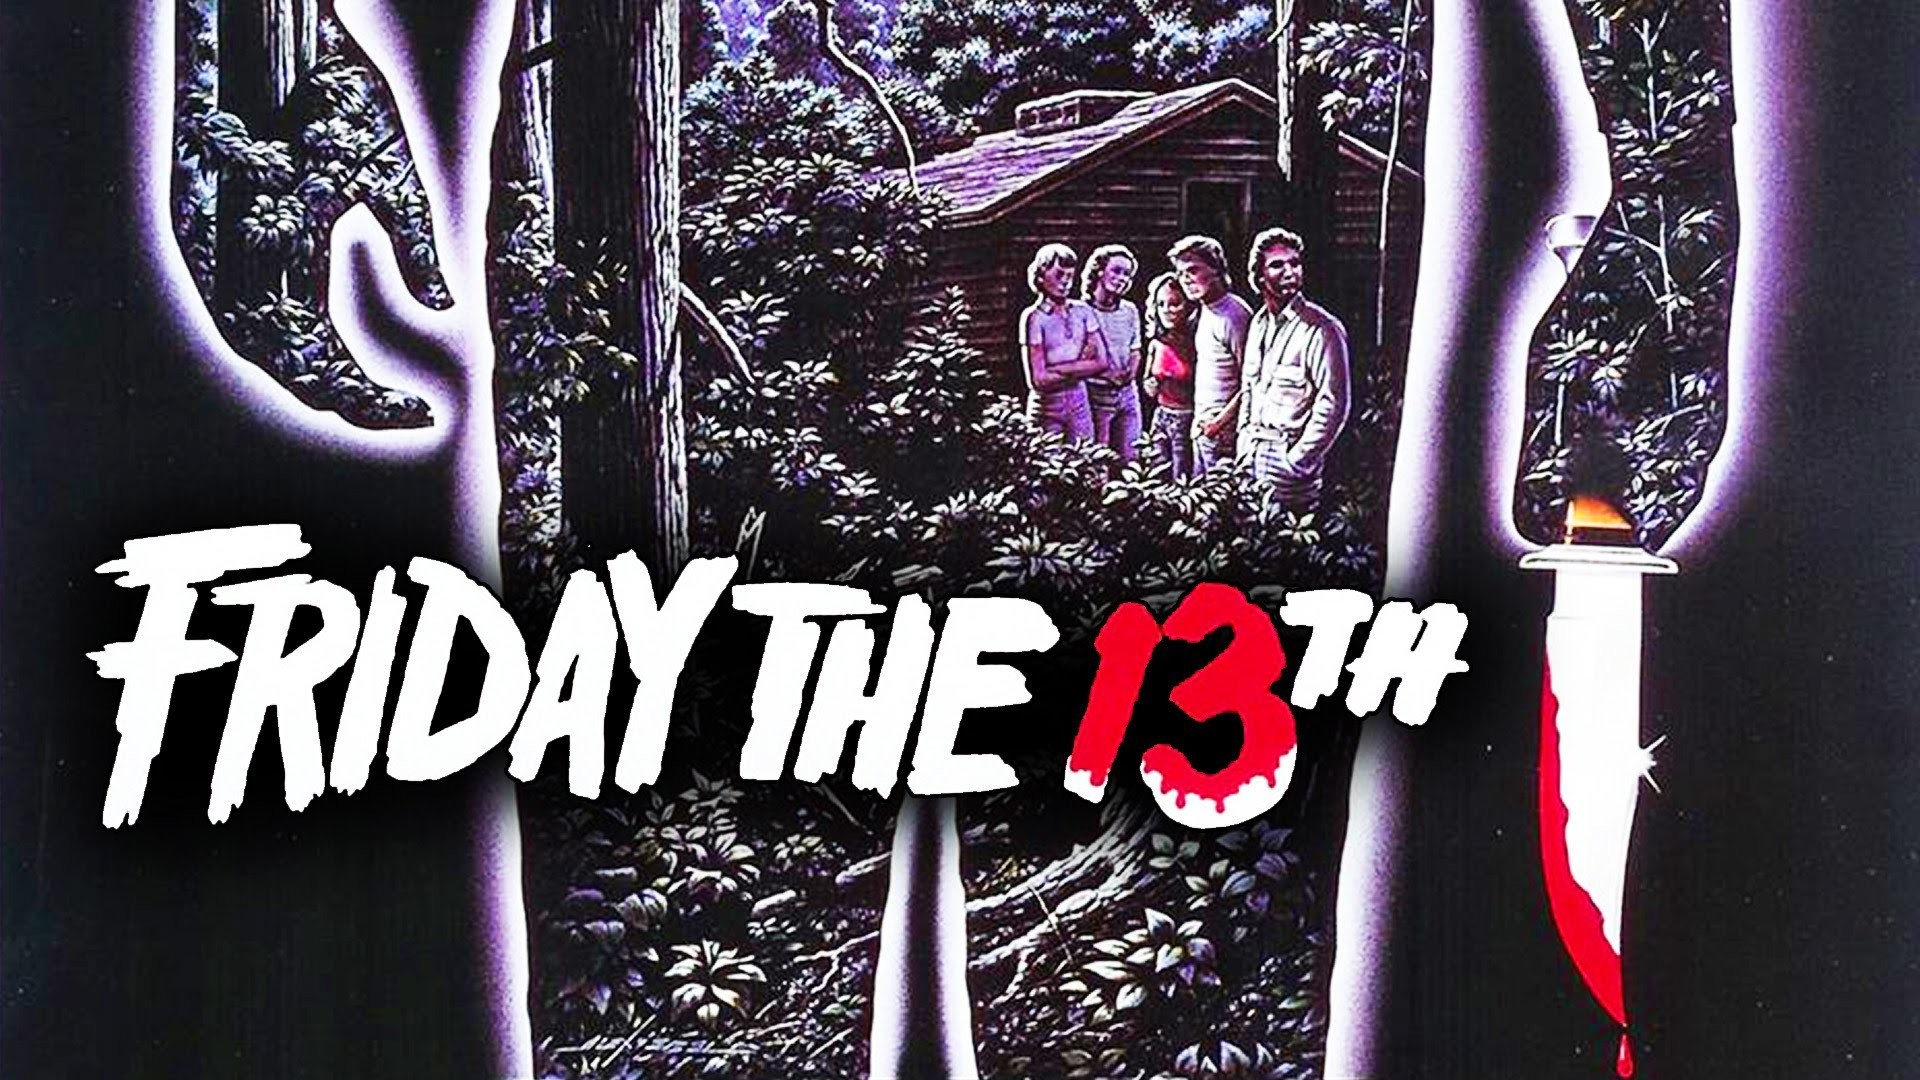 1920x1080 Friday the 13th (1980) Â» friday-the-13th-1980